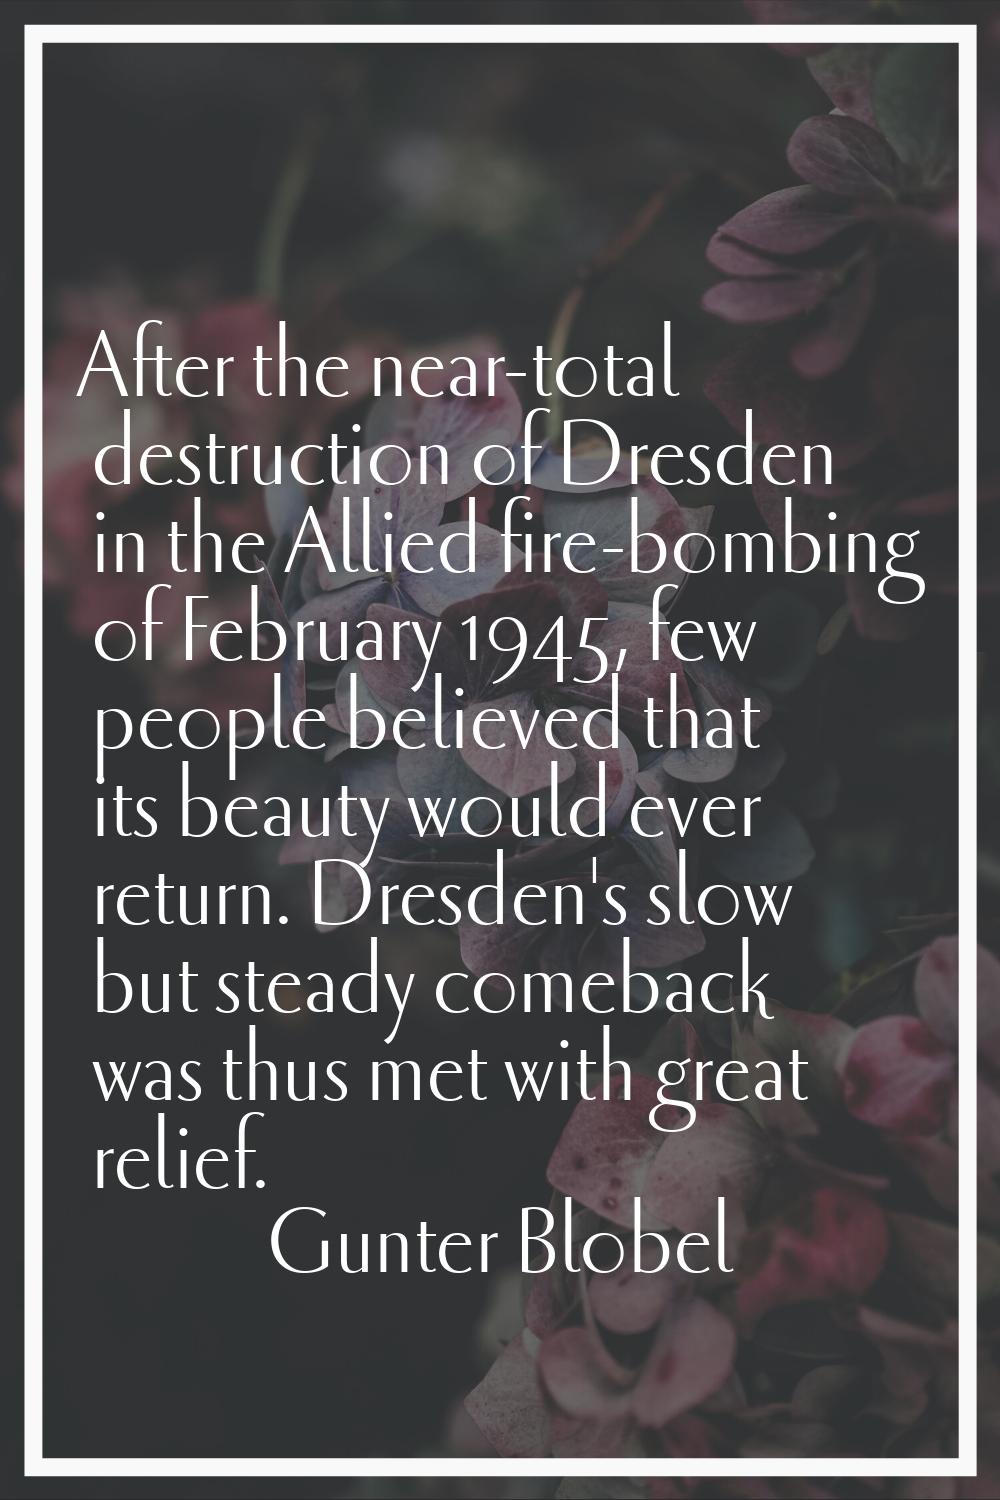 After the near-total destruction of Dresden in the Allied fire-bombing of February 1945, few people